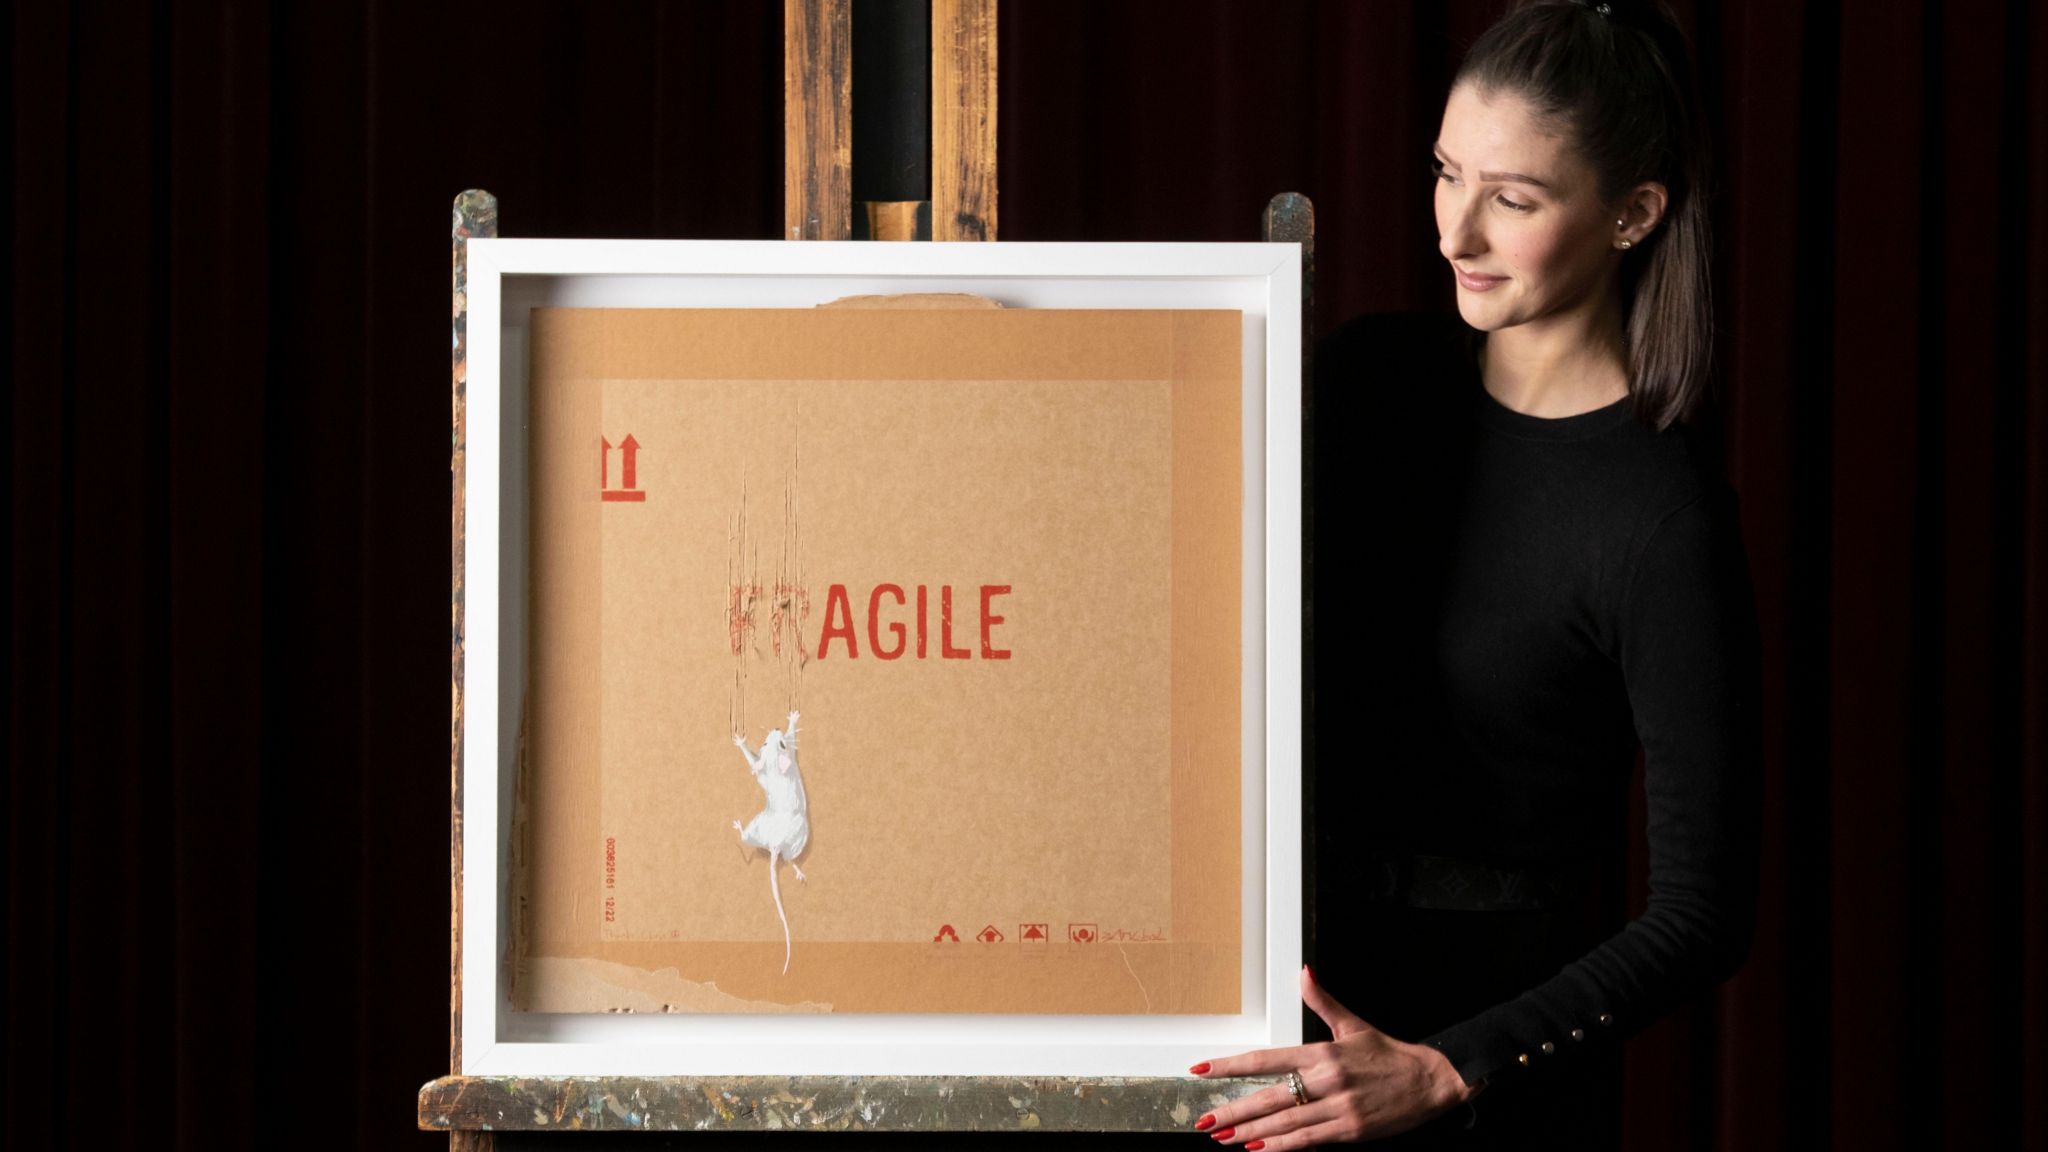 The rare 'AGILE piece to be auctioned in Glasgow